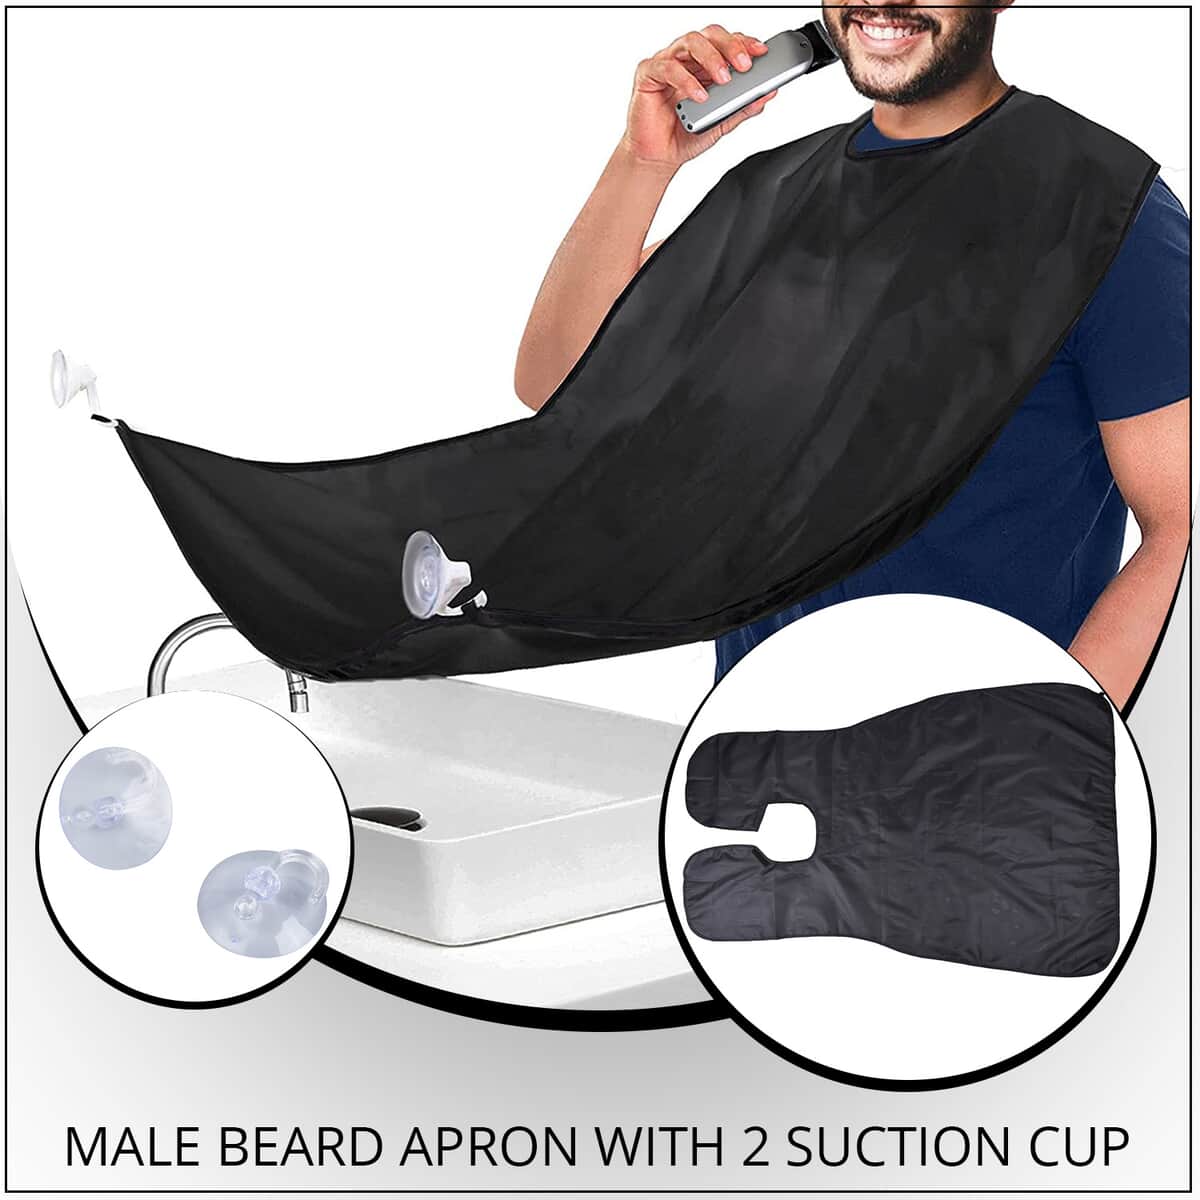 Male Beard Apron with 2 Suction Cup - Black image number 1